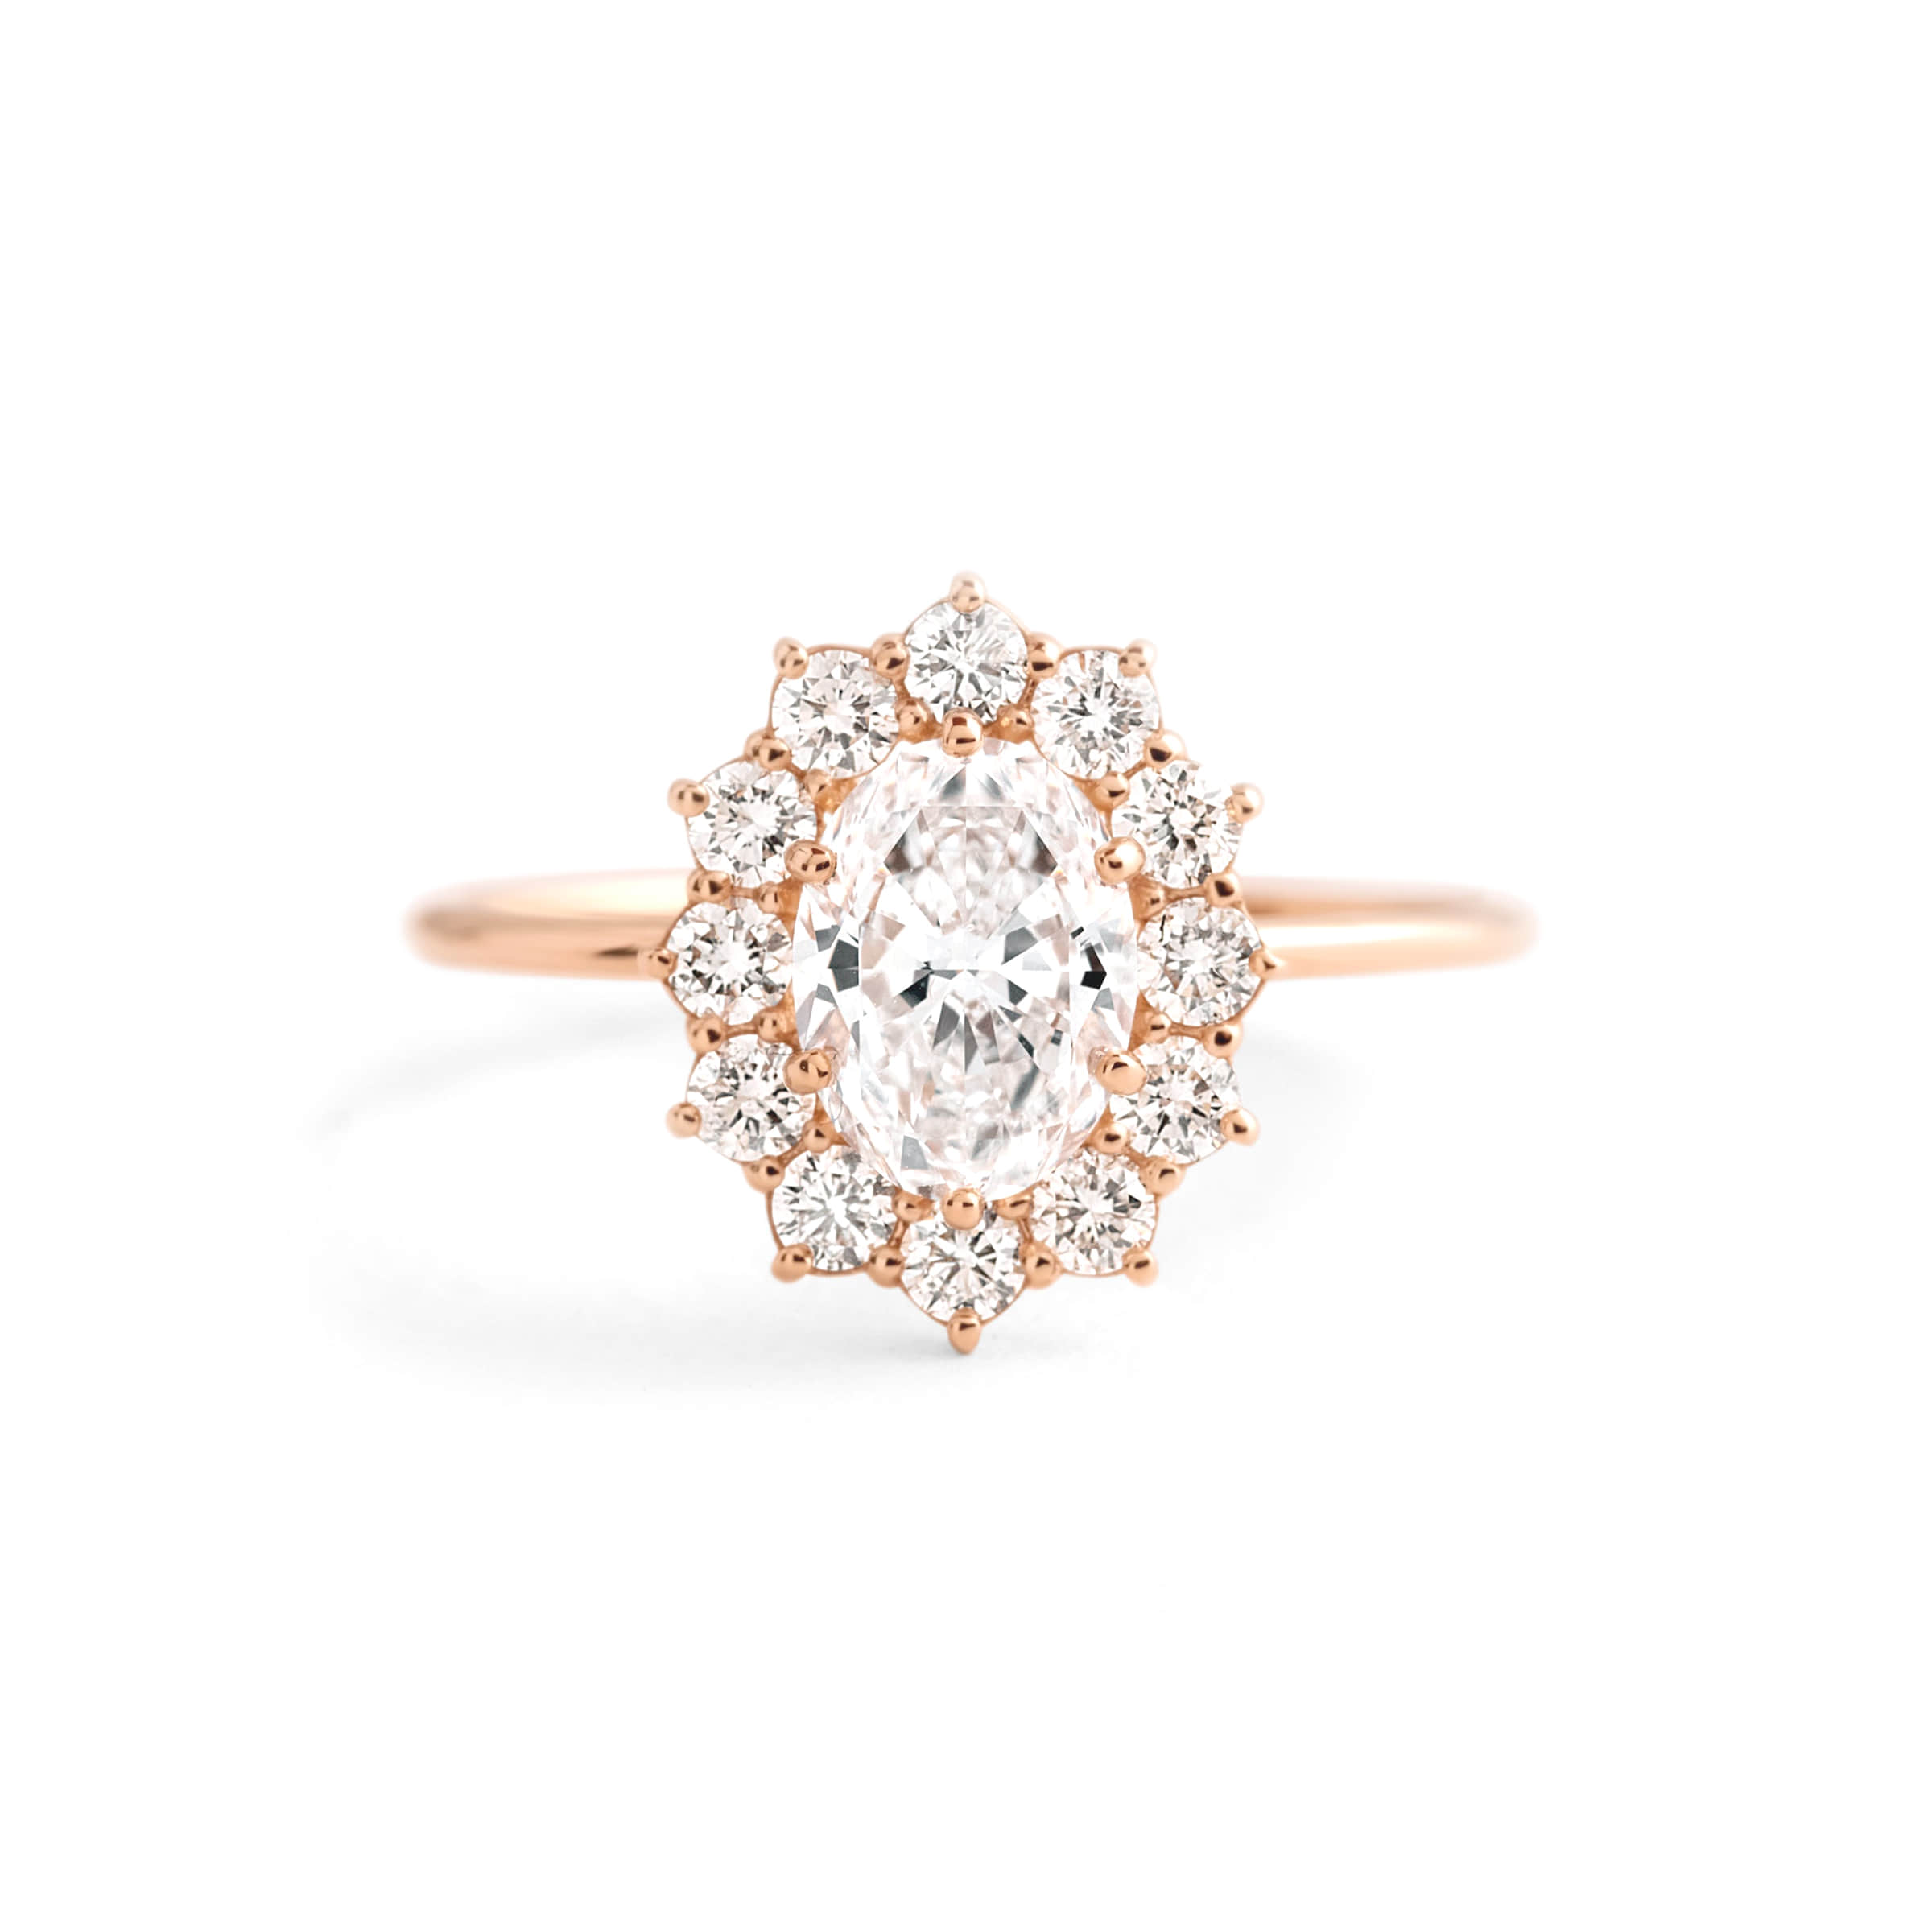 Darry Ring oval cut halo promise ring in rose gold